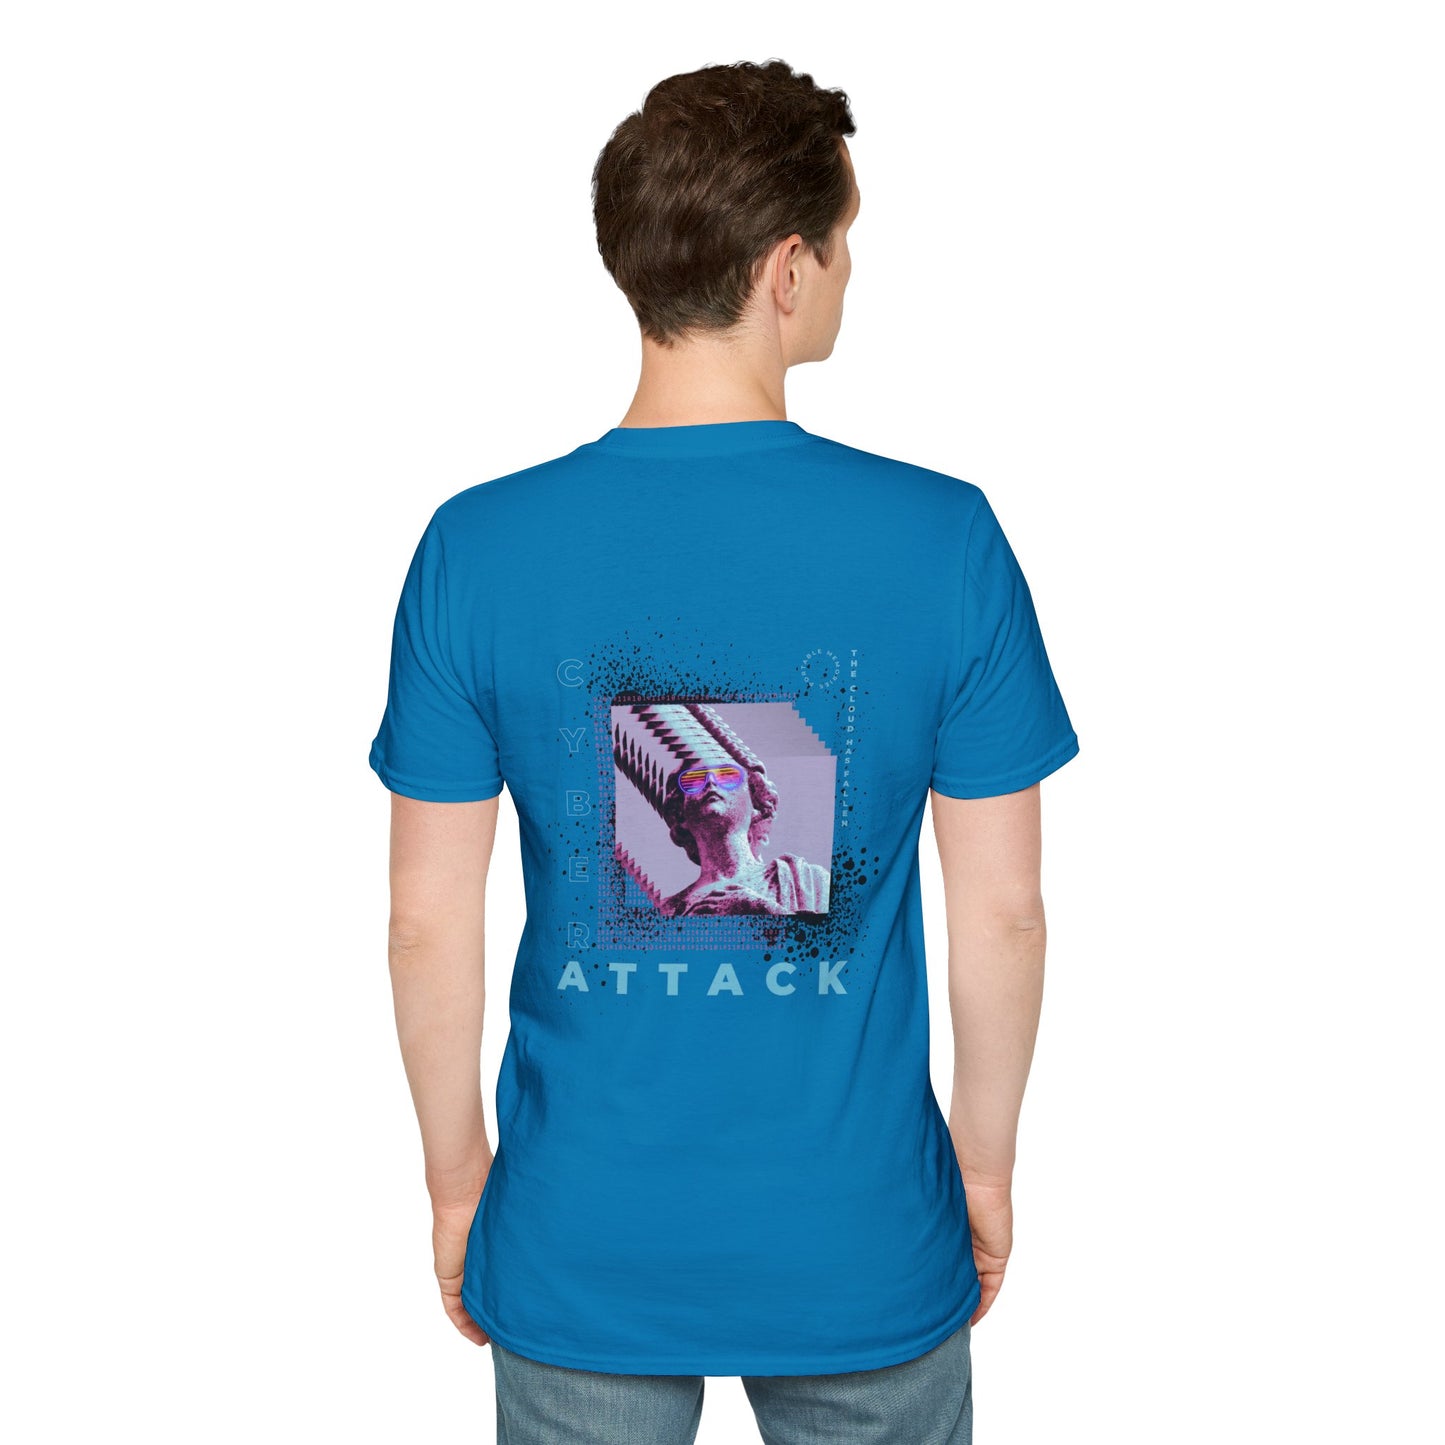 Sky Blue T-shirt with a pixelated Statue of Liberty and modern glitch art design